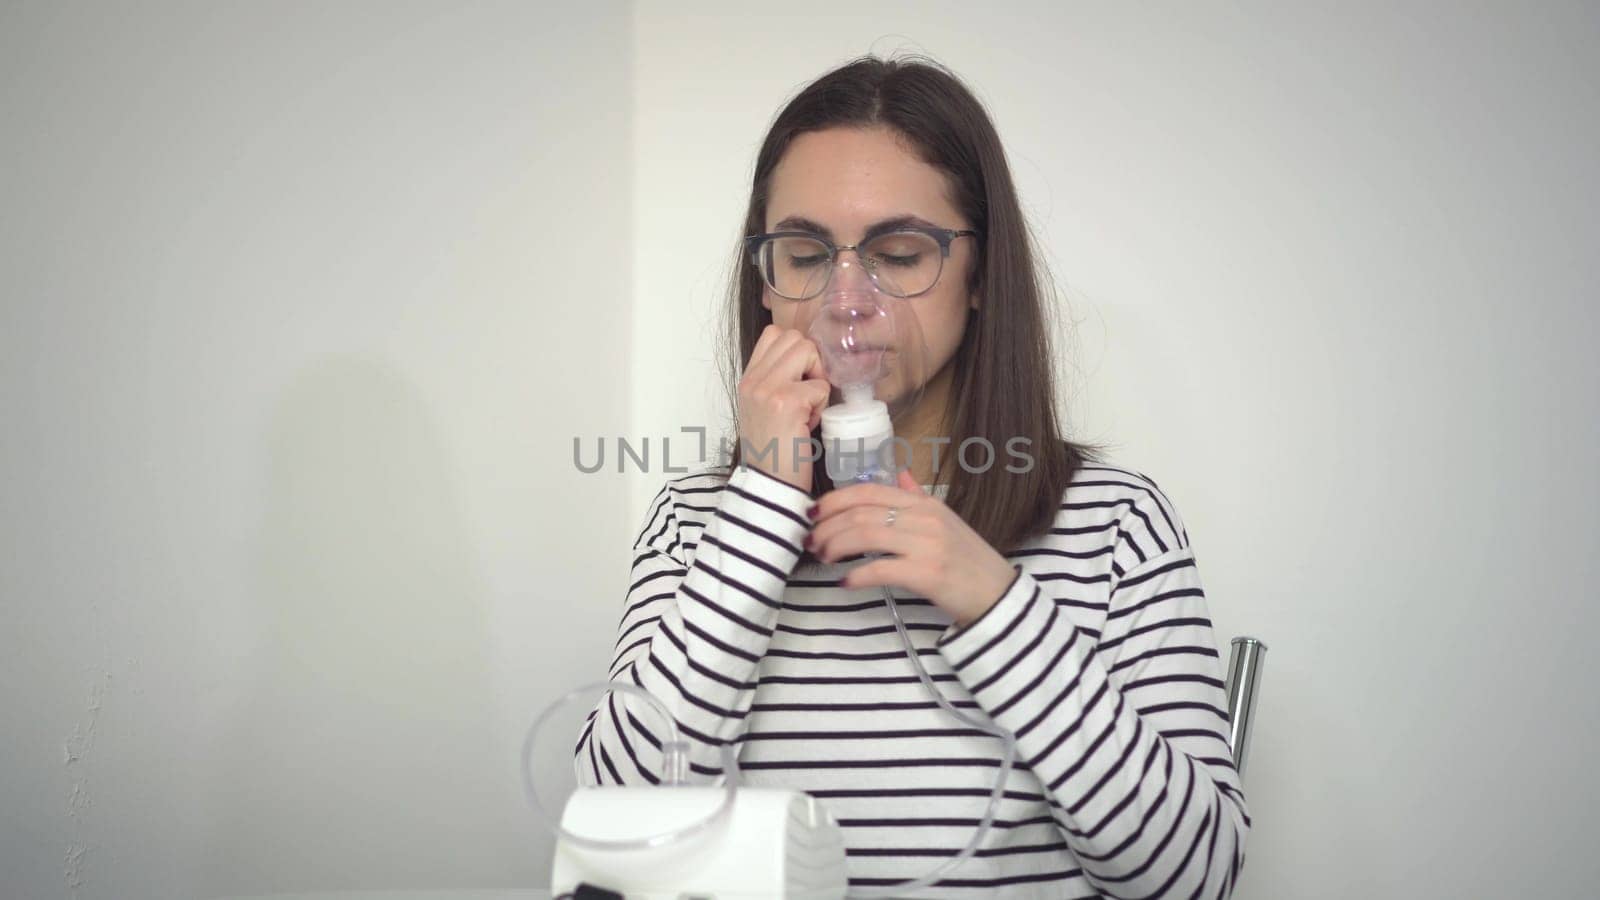 A young woman breathes through an inhaler mask. A girl in glasses with an oxygen mask is being treated for a respiratory infection. 4k